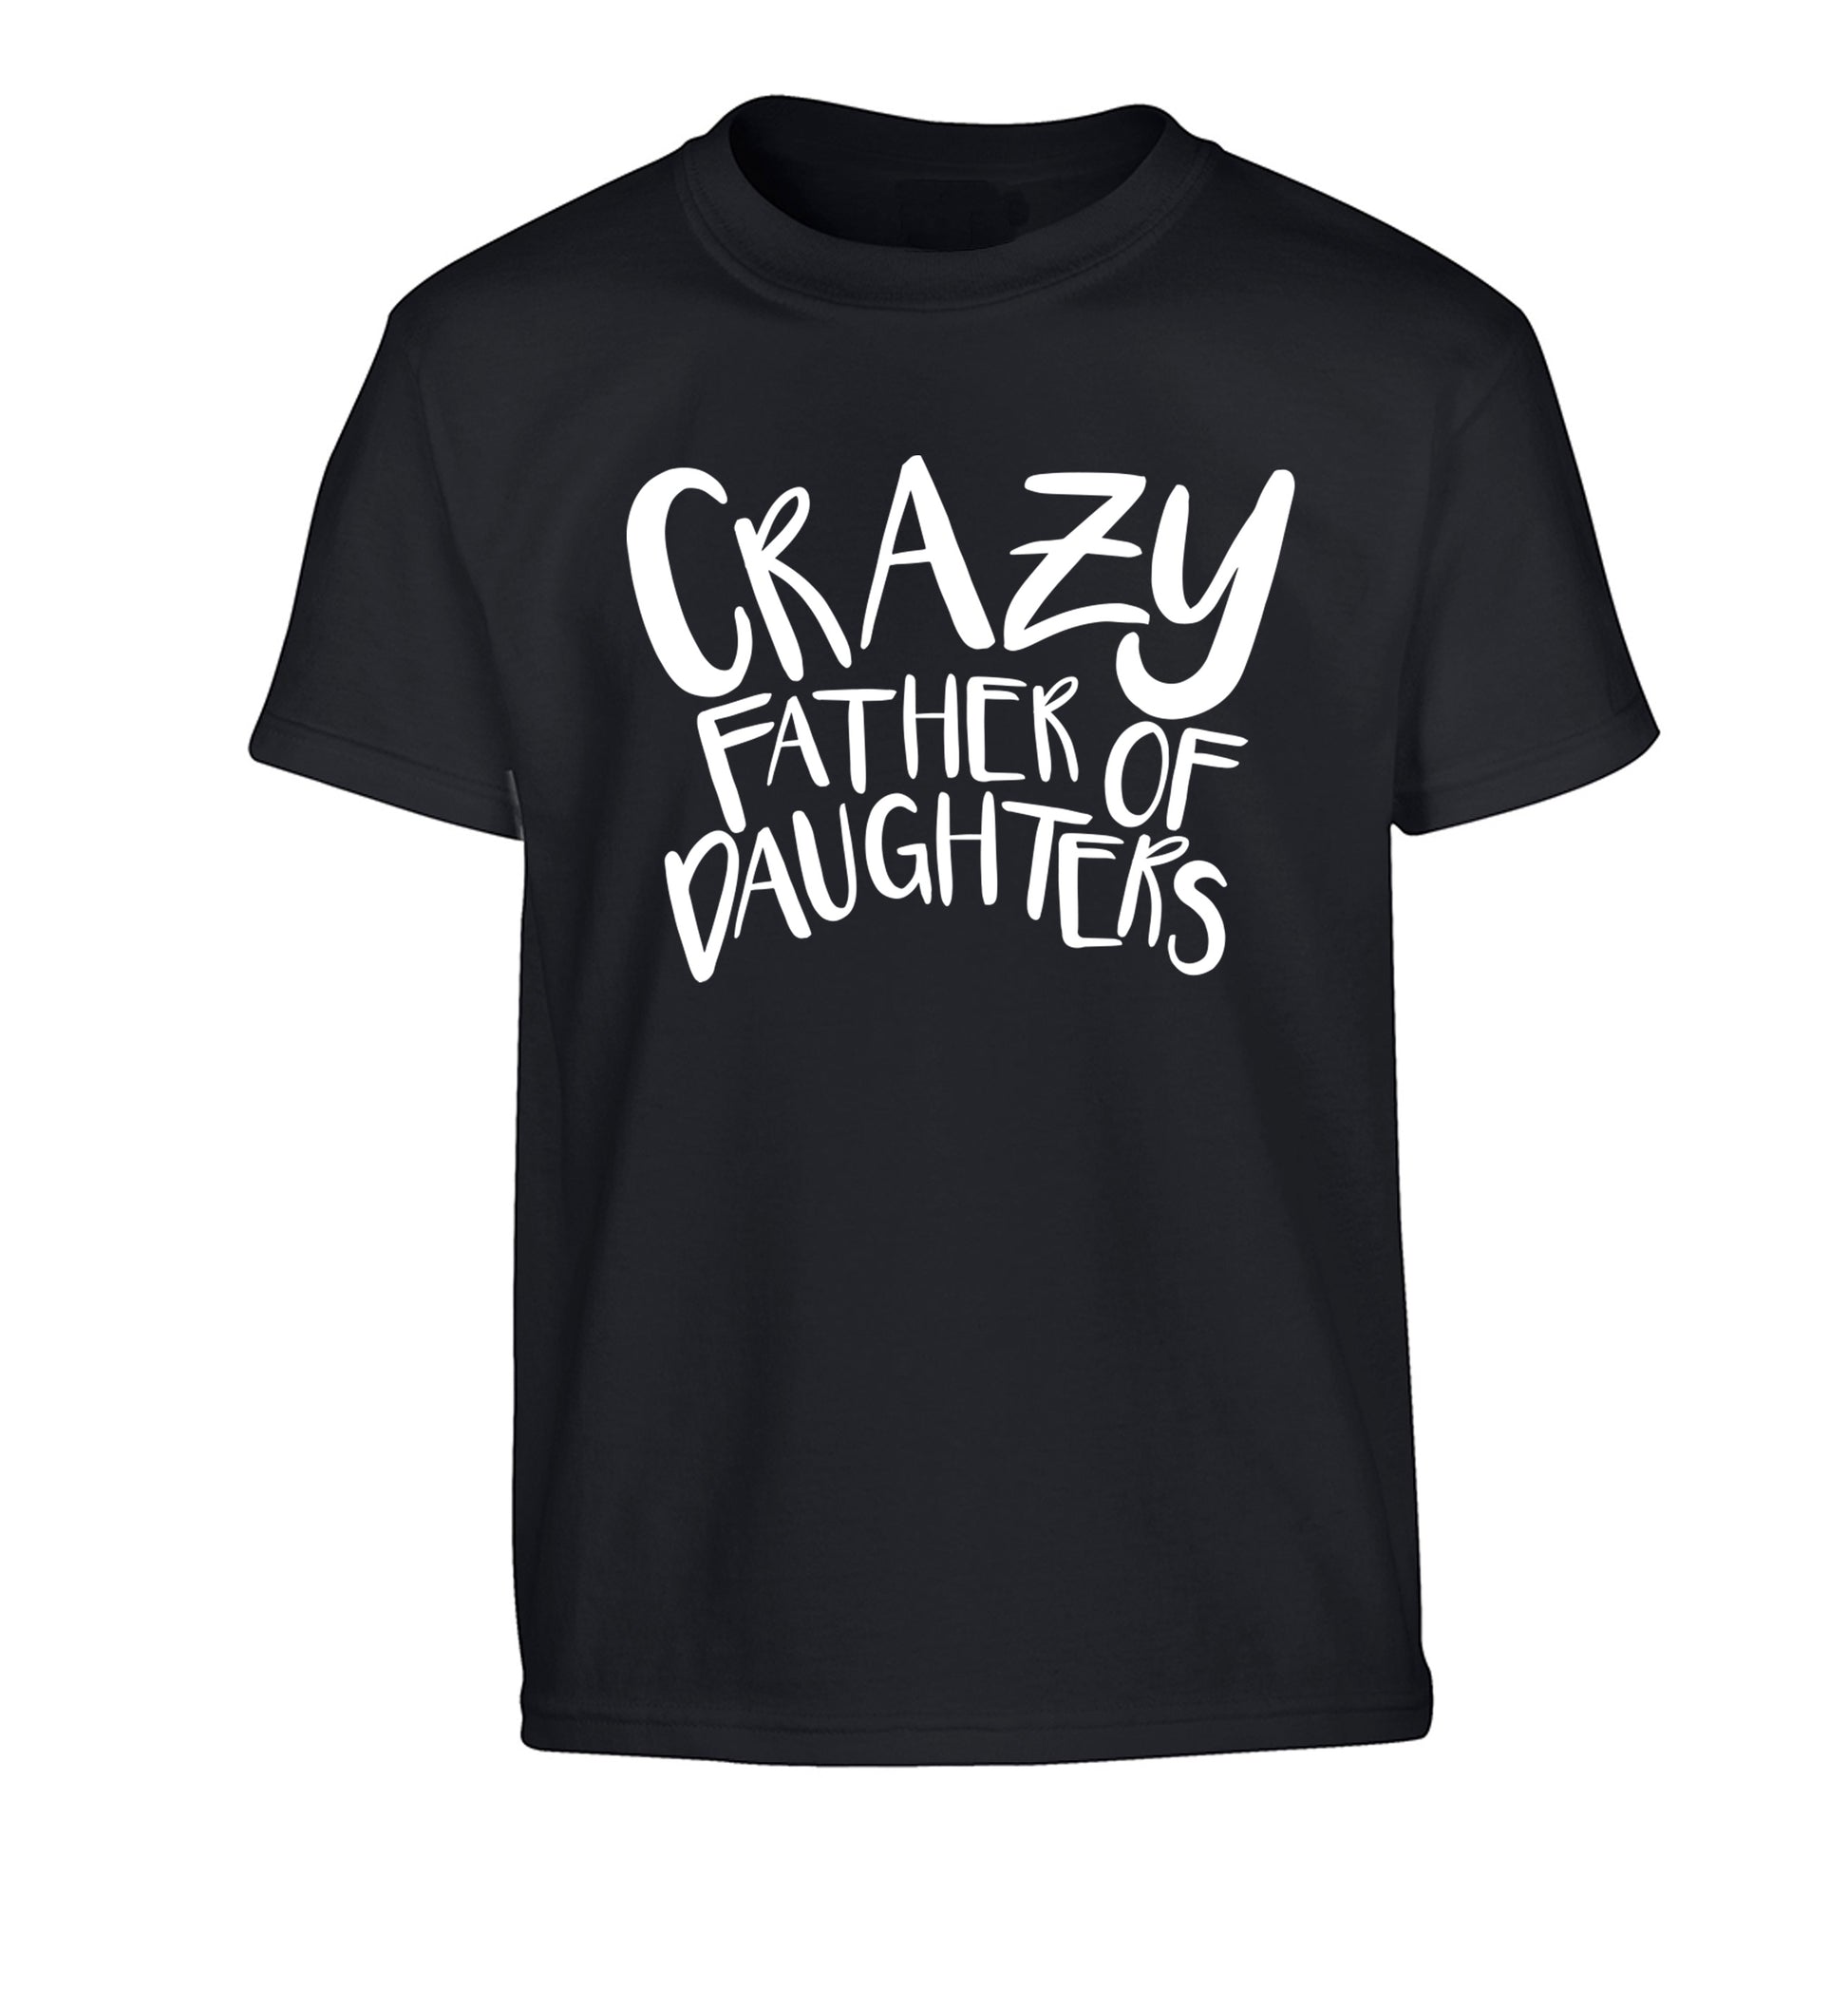 Crazy father of daughters Children's black Tshirt 12-13 Years